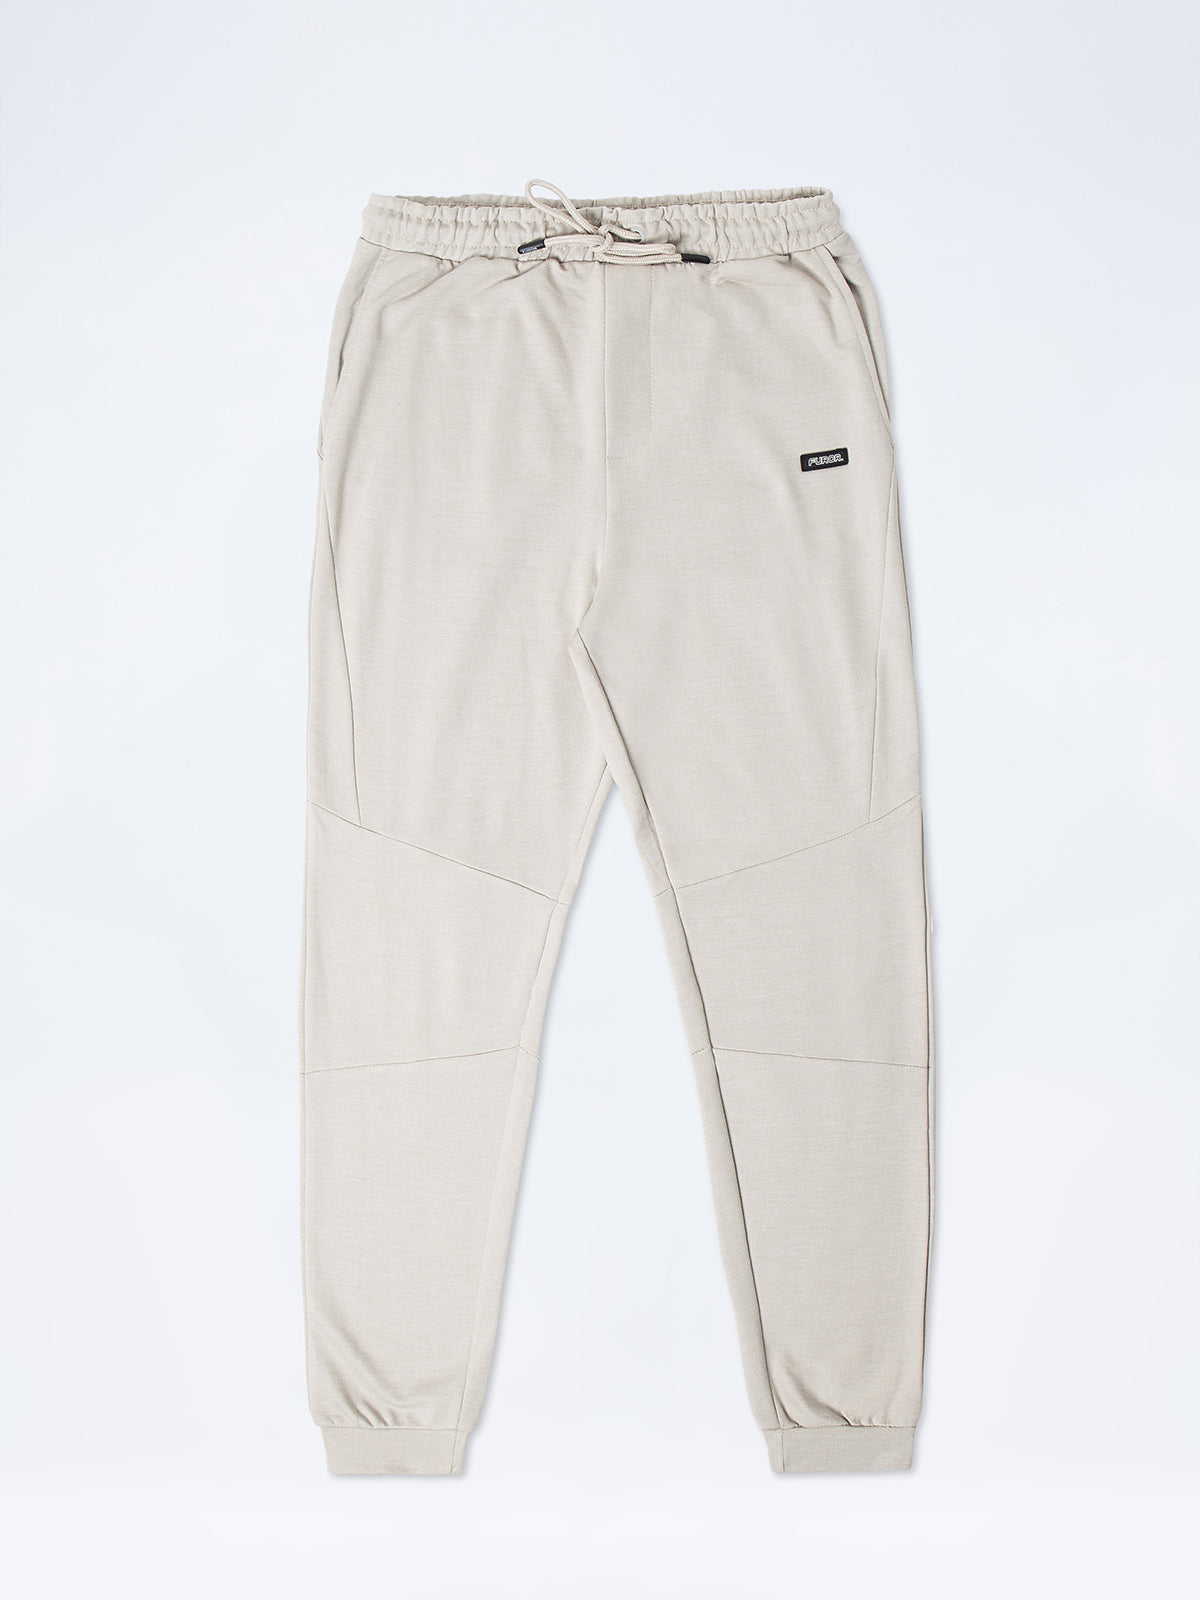 French Terry Jog Pant - FMBT24-020